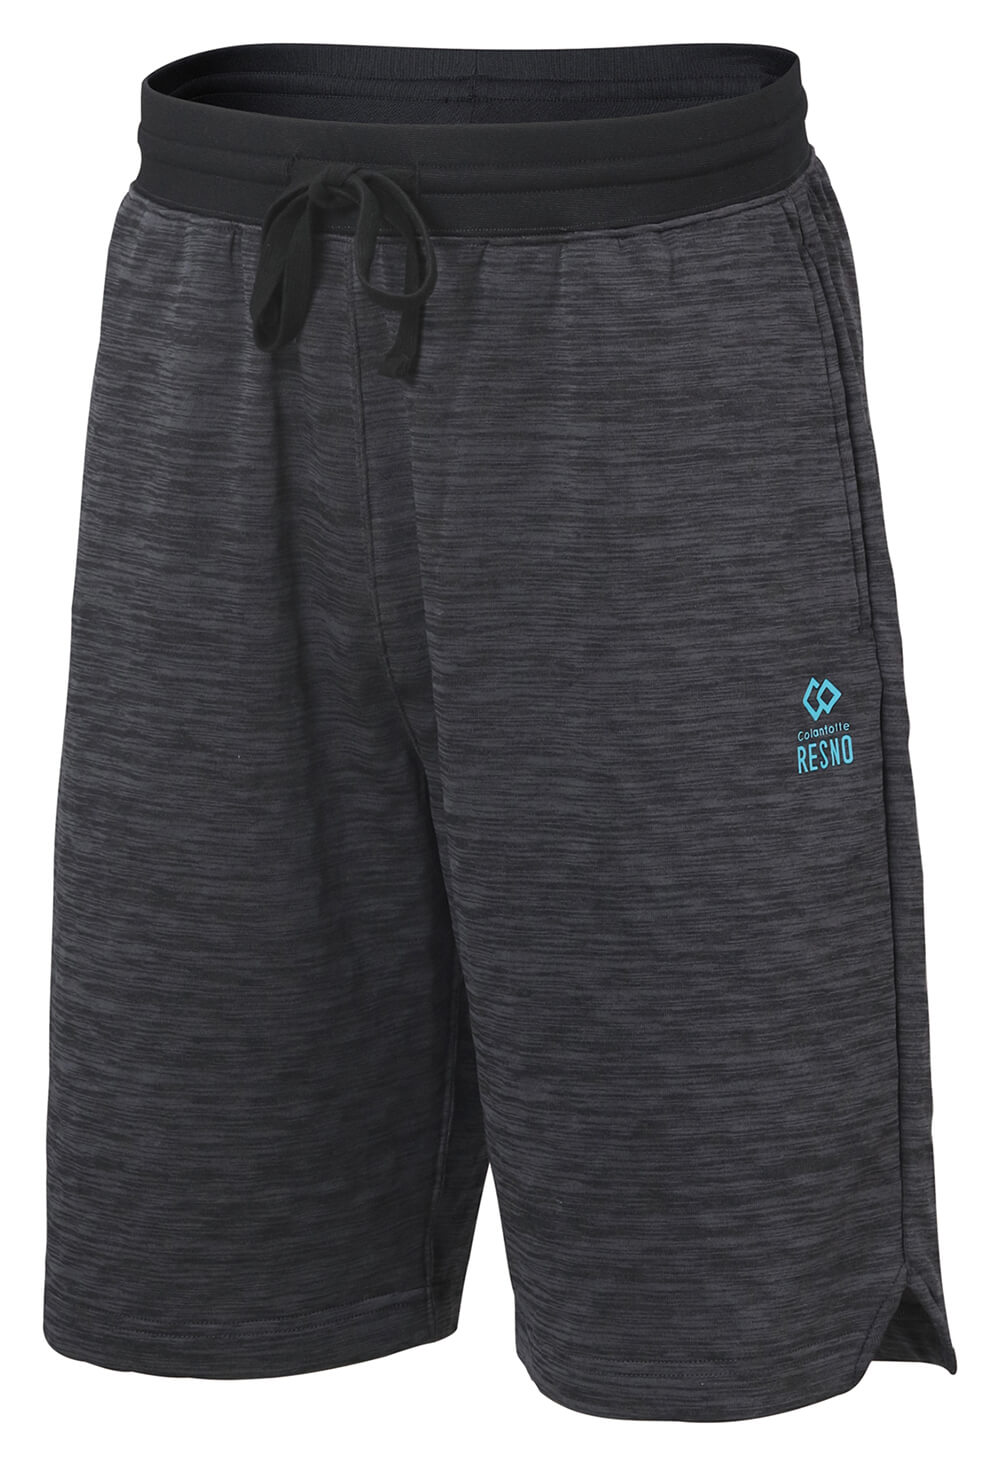 Colantotte RESNO MAGNE RECOVERY WEAR PLUS Shorts